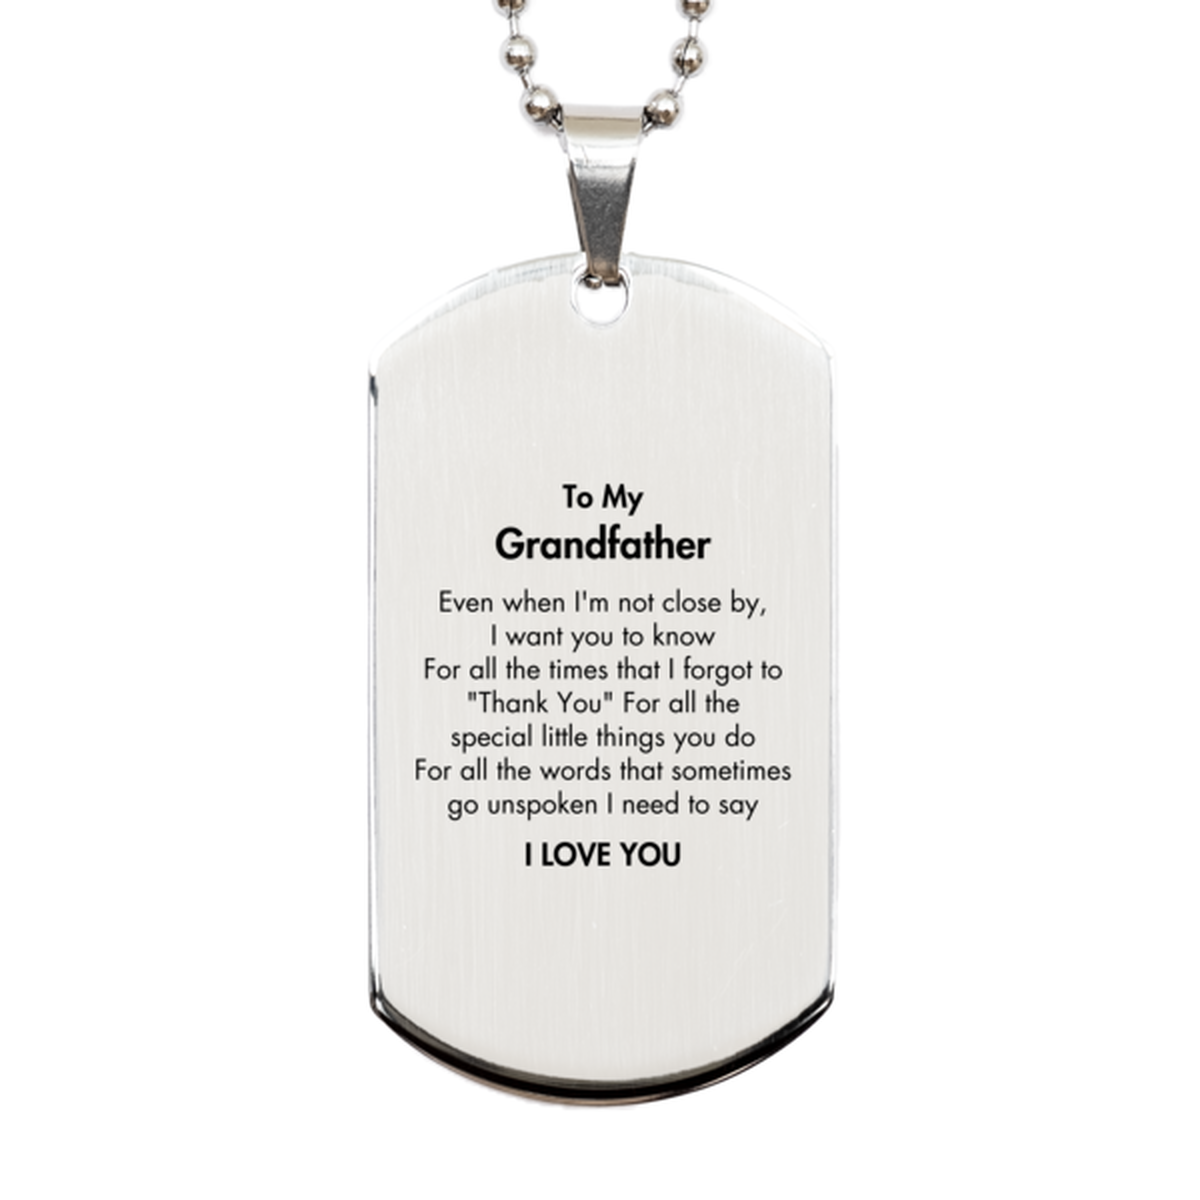 Thank You Gifts for Grandfather, Keepsake Silver Dog Tag Gifts for Grandfather Birthday Mother's day Father's Day Grandfather For all the words That sometimes go unspoken I need to say I LOVE YOU